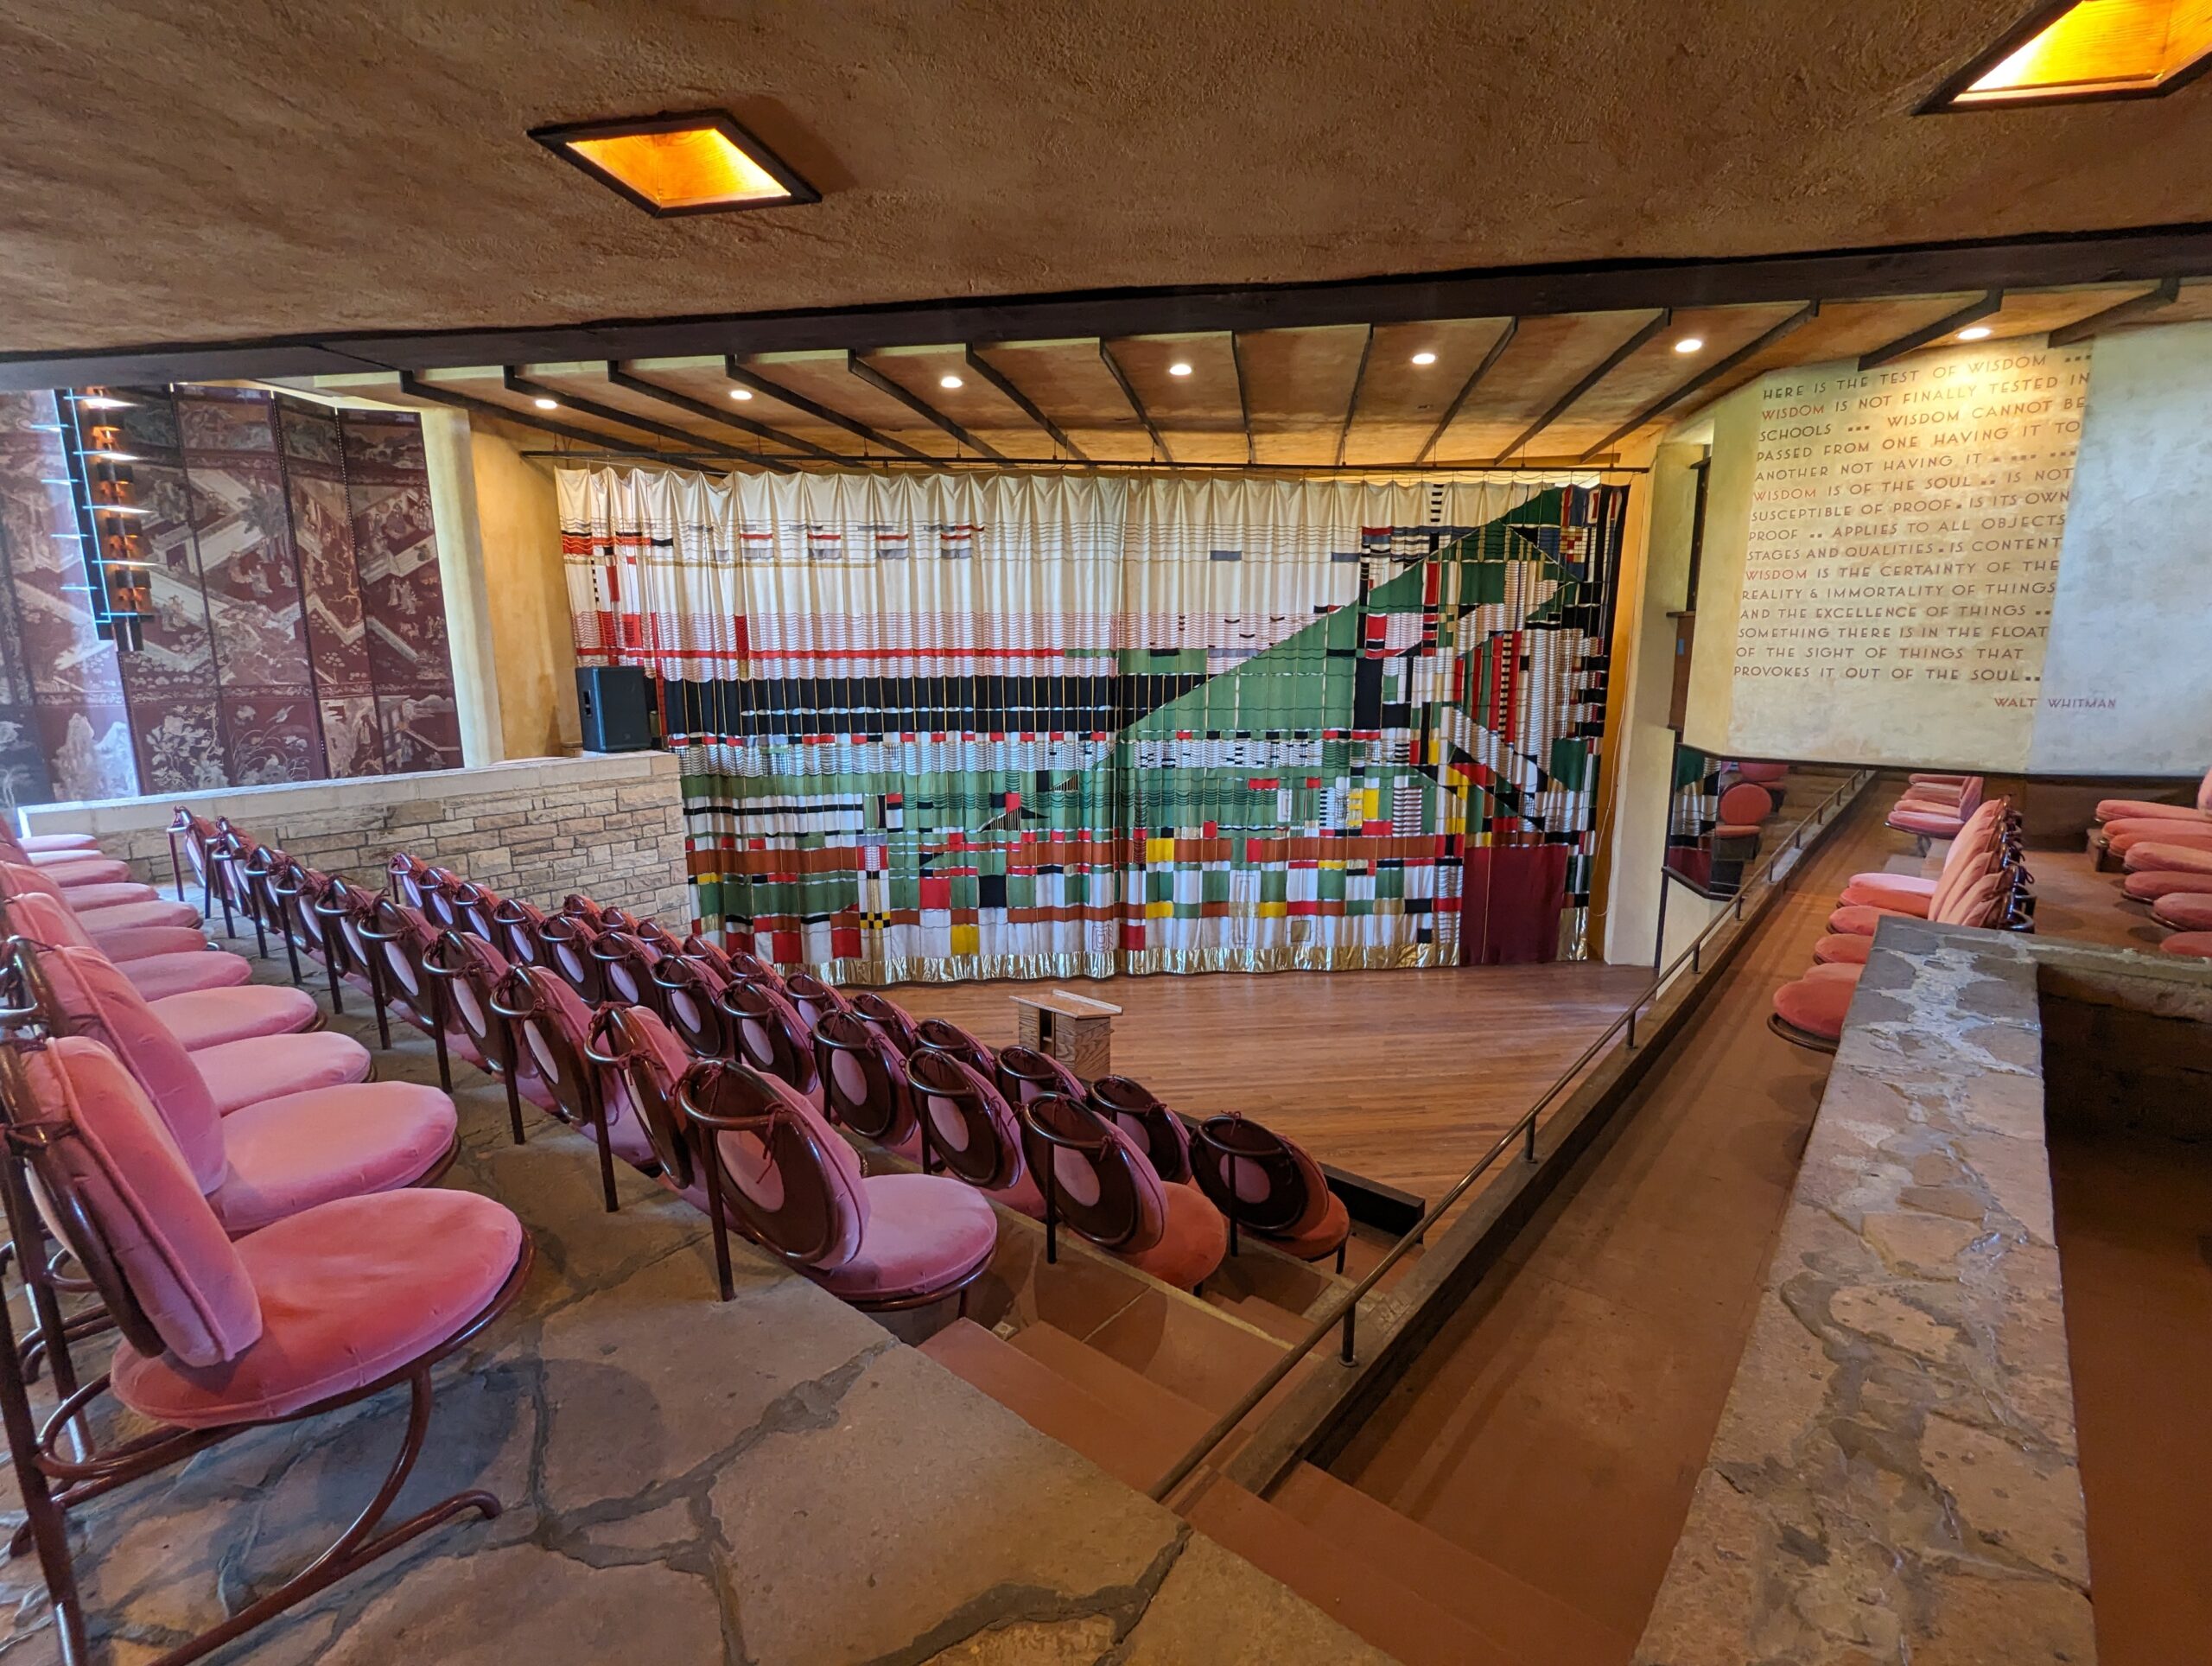 After years of renovations, theater at Frank Lloyd Wright’s Taliesin reopens